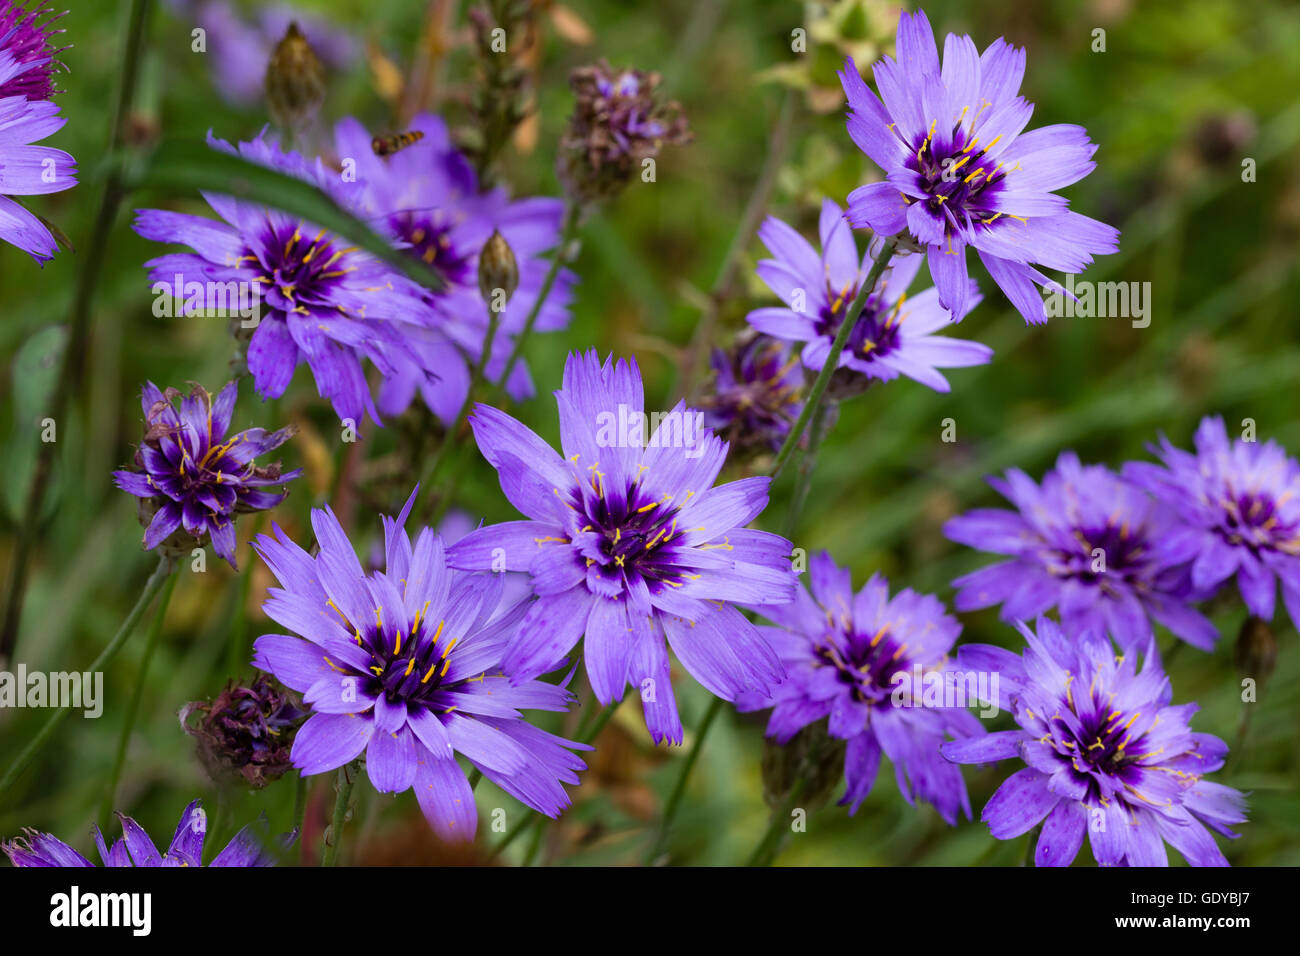 Papery violet blue flowers of the short lived perennial Cupid's Dart, Catananche caerulea Stock Photo